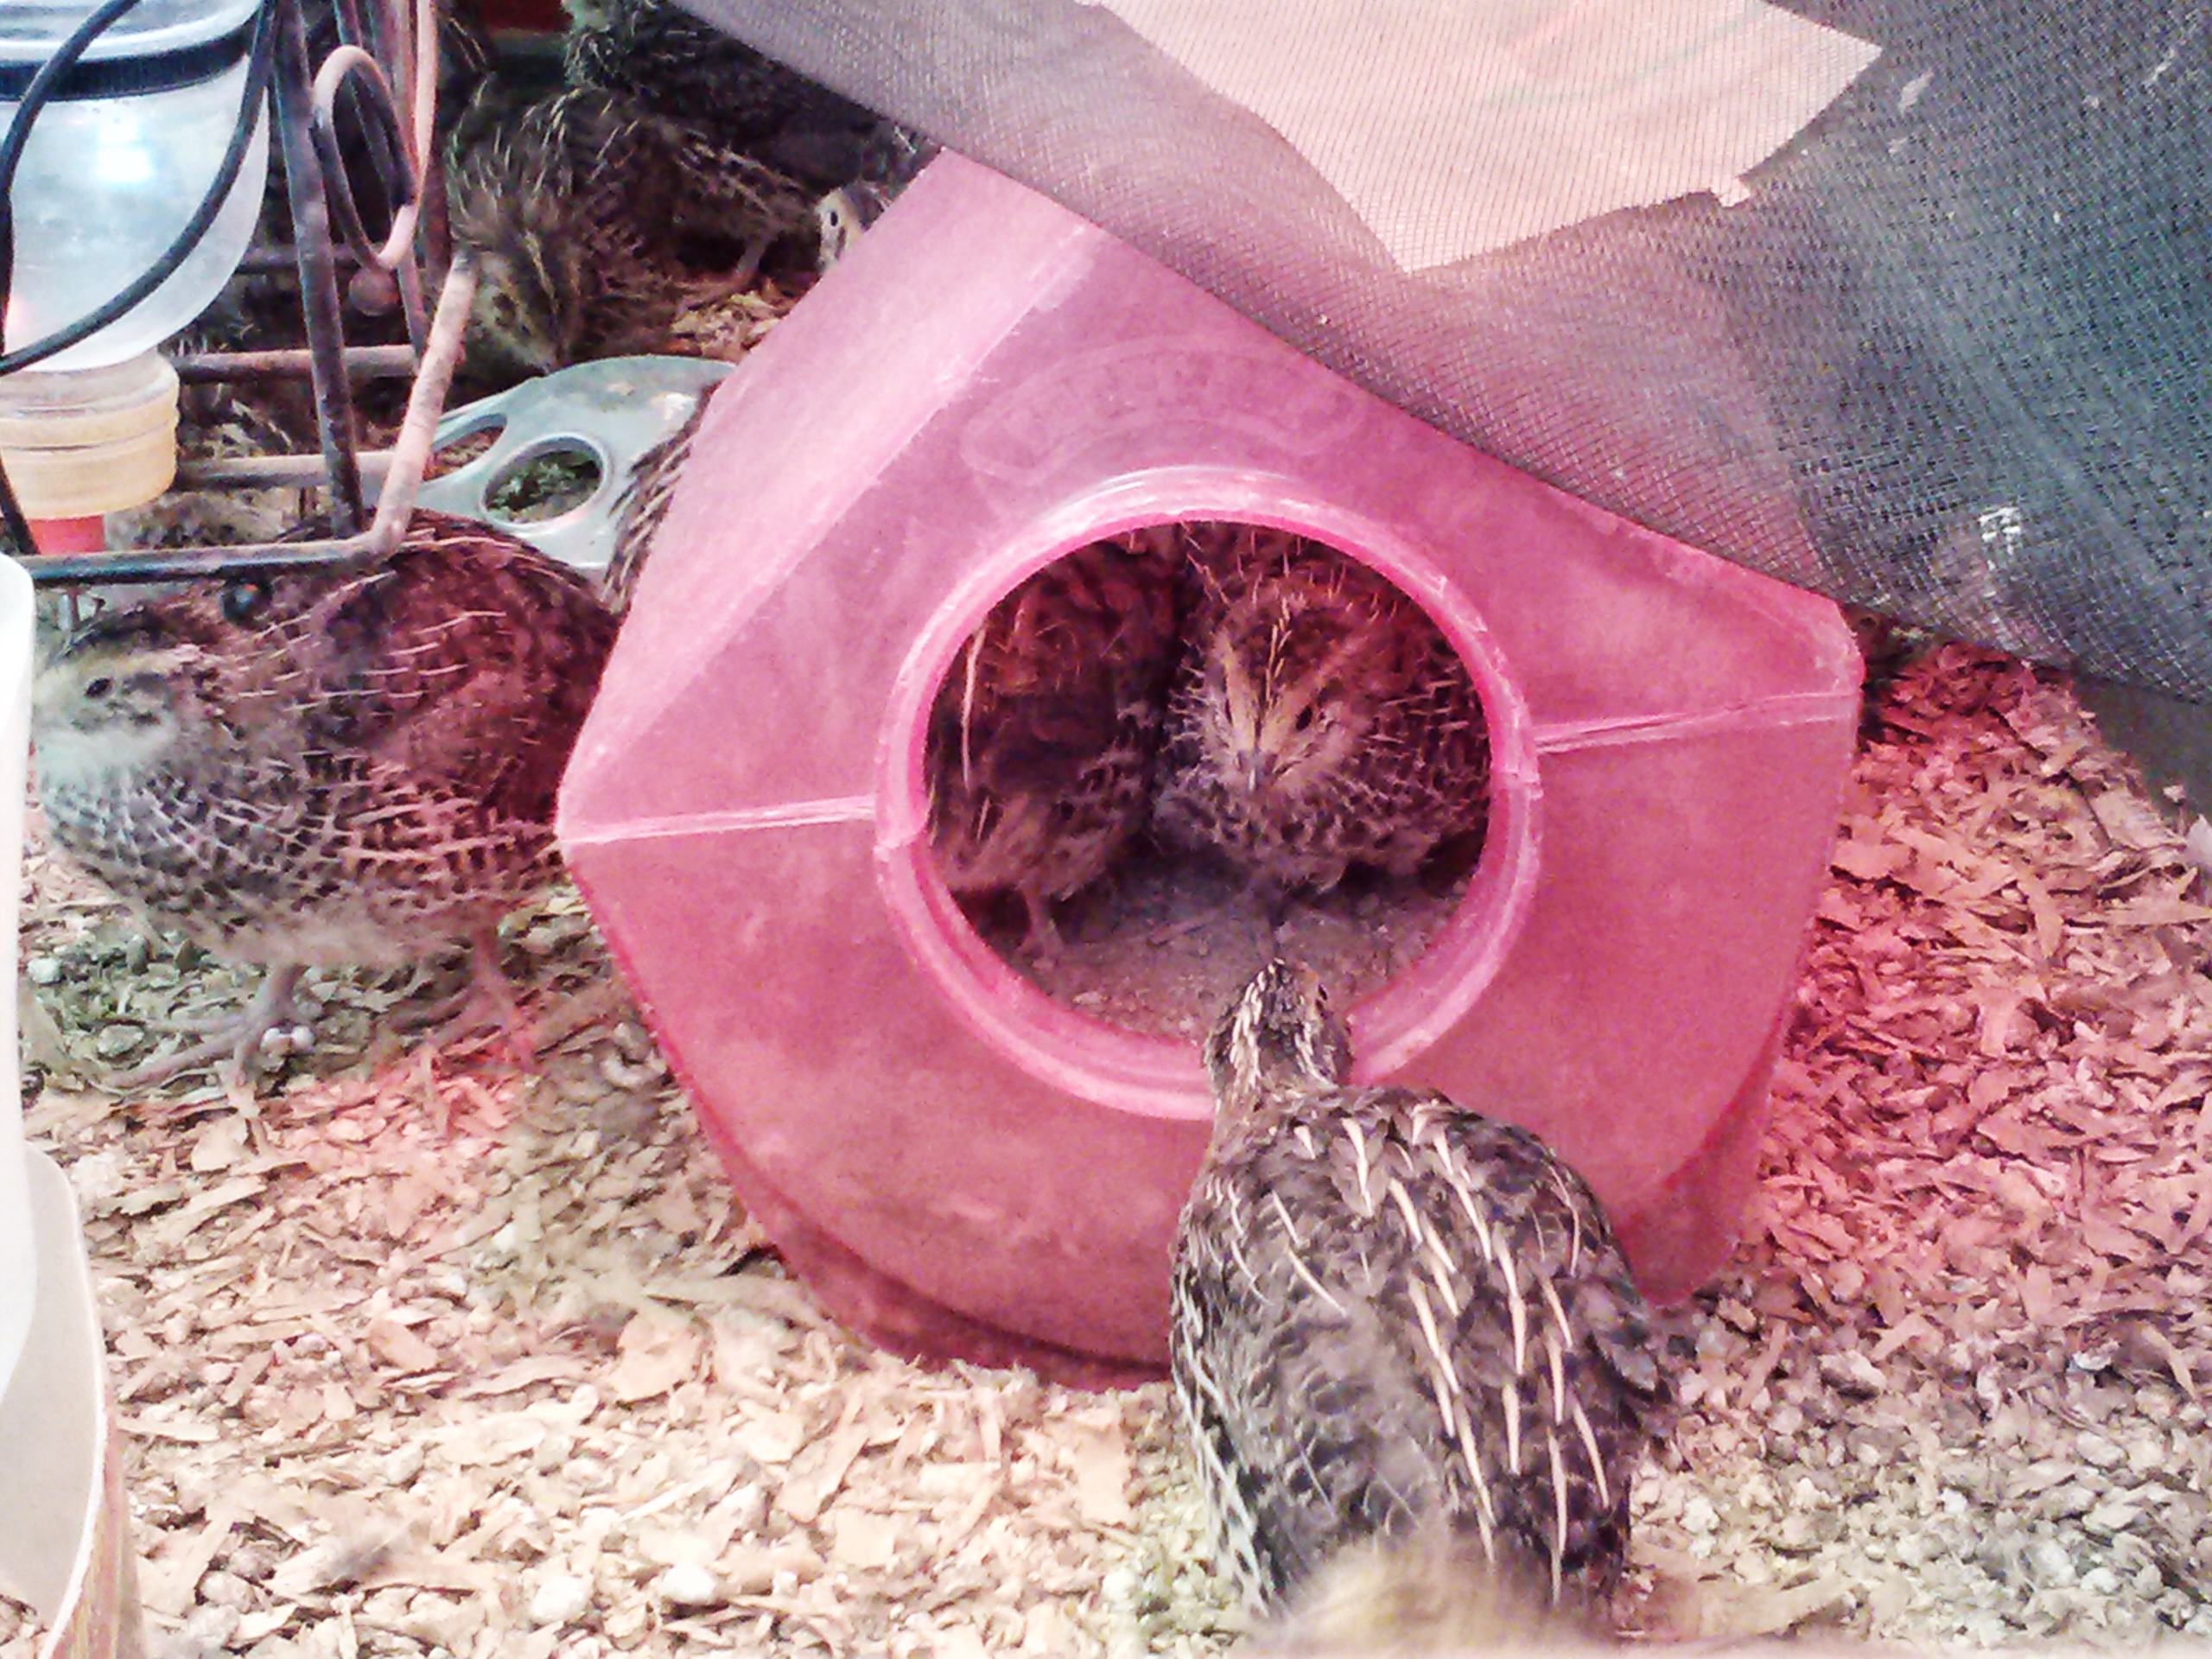 About 3 weeks old taking a dust bath in a chinchilla bath house. 4/08/14